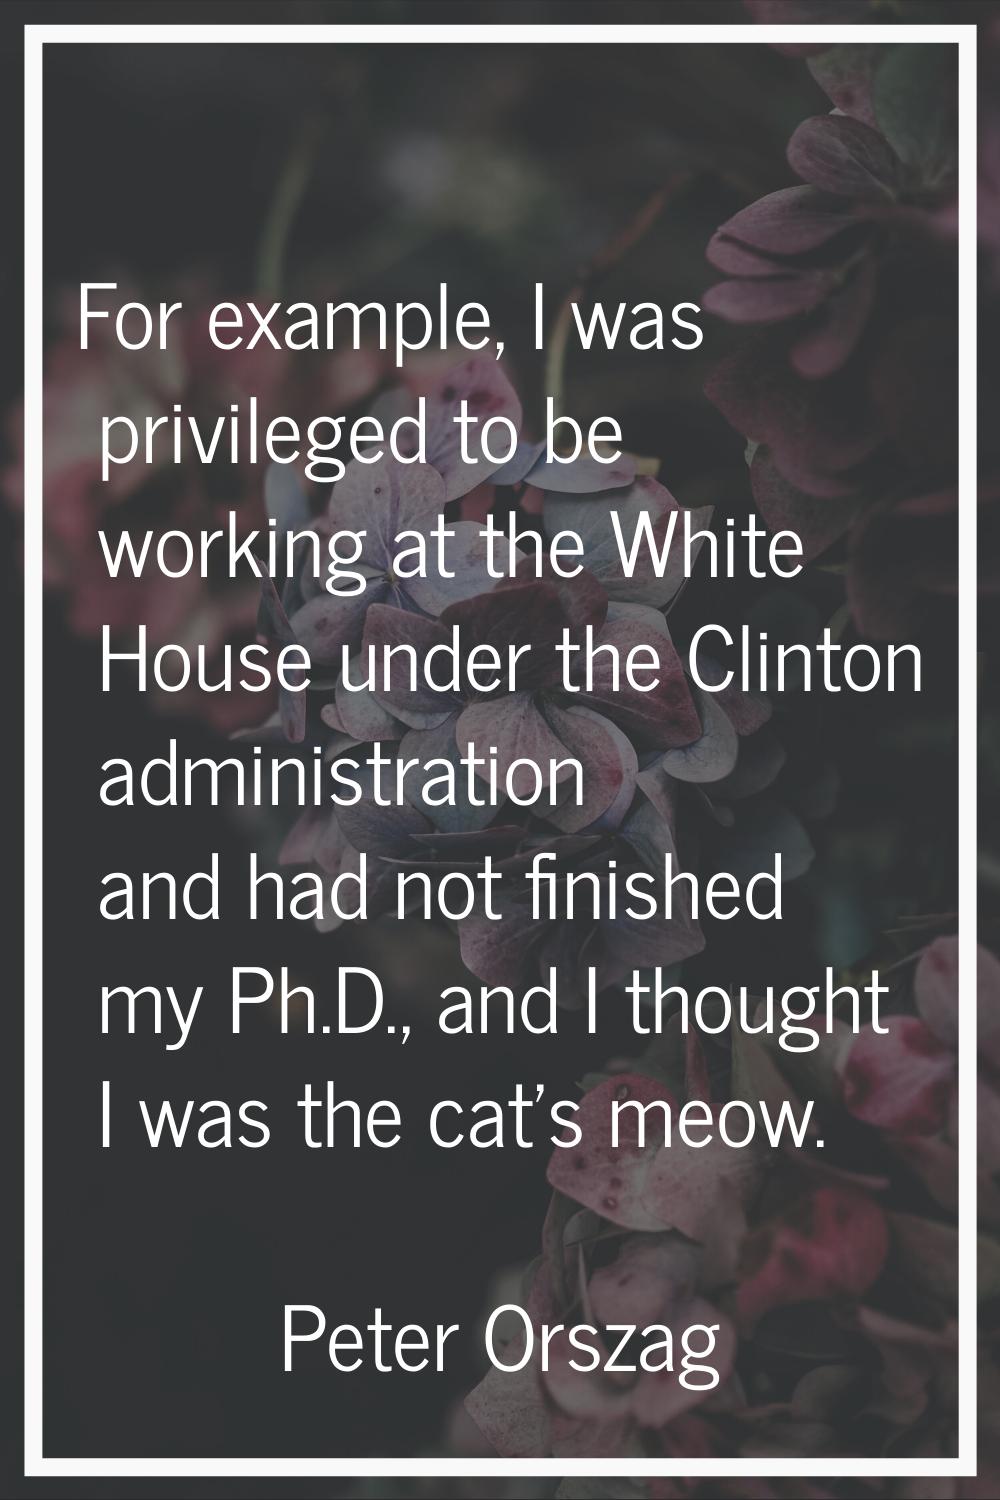 For example, I was privileged to be working at the White House under the Clinton administration and